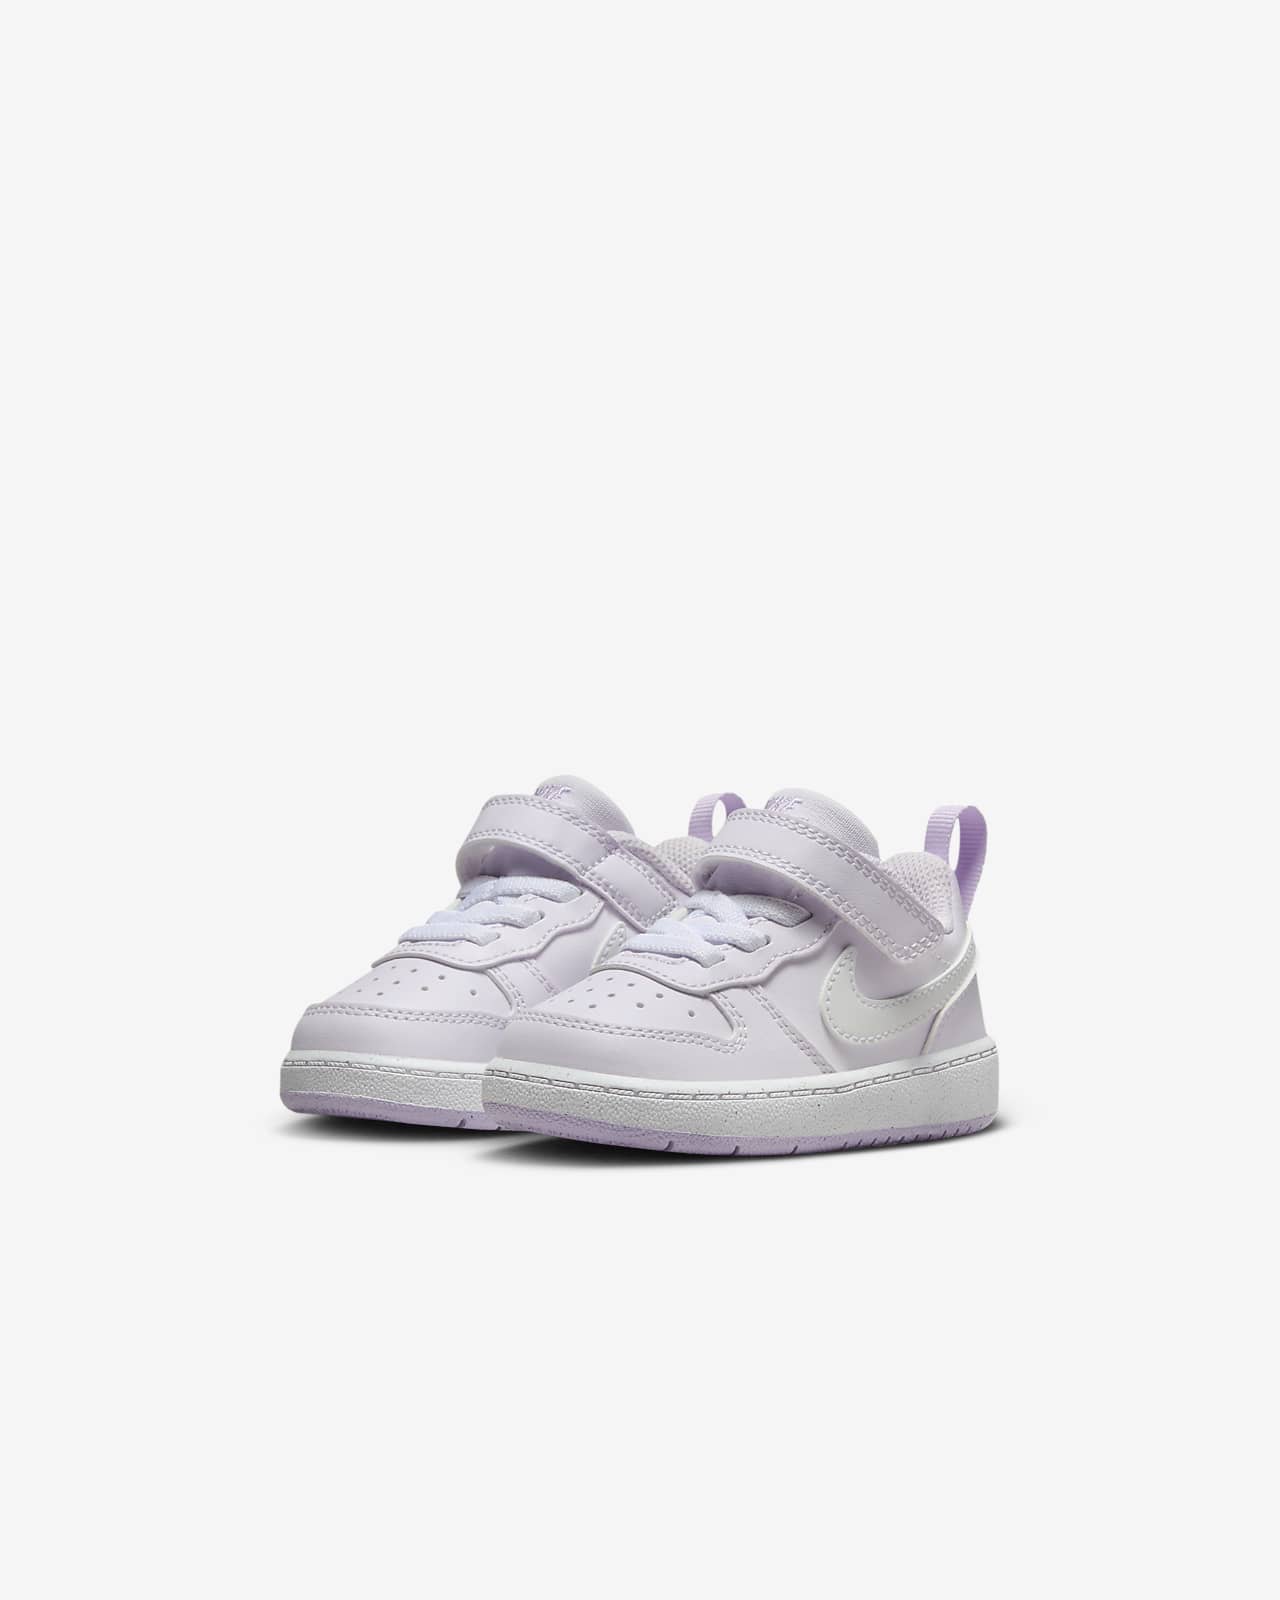 Low Baby/Toddler Recraft Borough Shoes. Nike Court